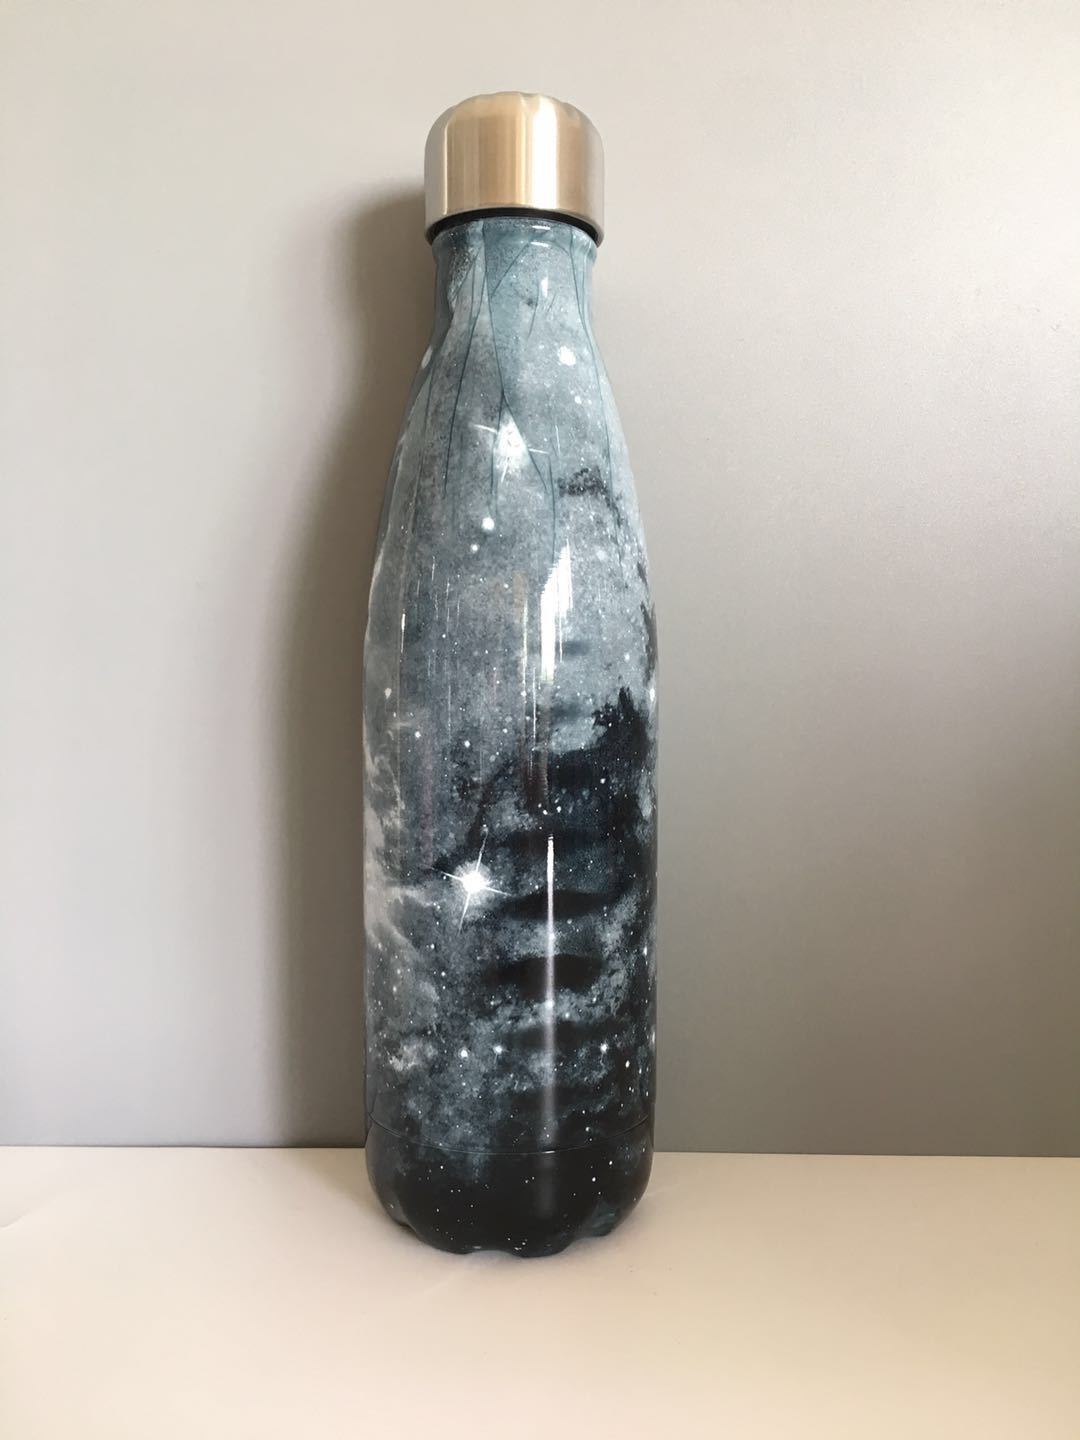 Image for stainless steel vacuum flask with sky galaxy style printing in grey color shade. The bottle has a stainless steel cap with a silicone sealing ring inside to keep it air tight when capped.